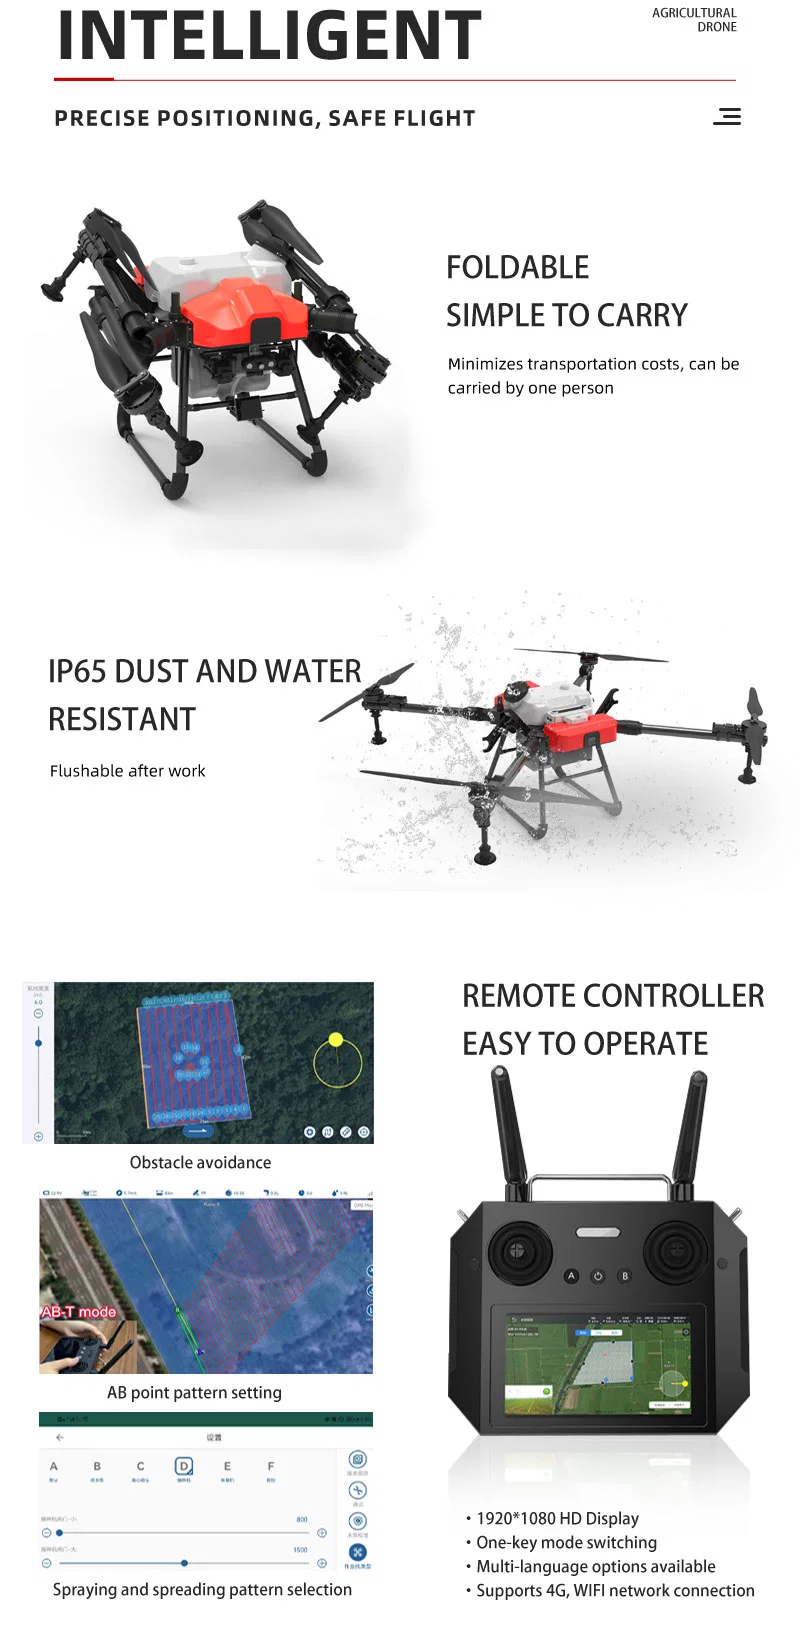 Haojing Hongfei Professional 30 Liters Agro Drones Hf T30 Pesticide Spraying Drone for Agricultural Farm Water Irrigation Spray